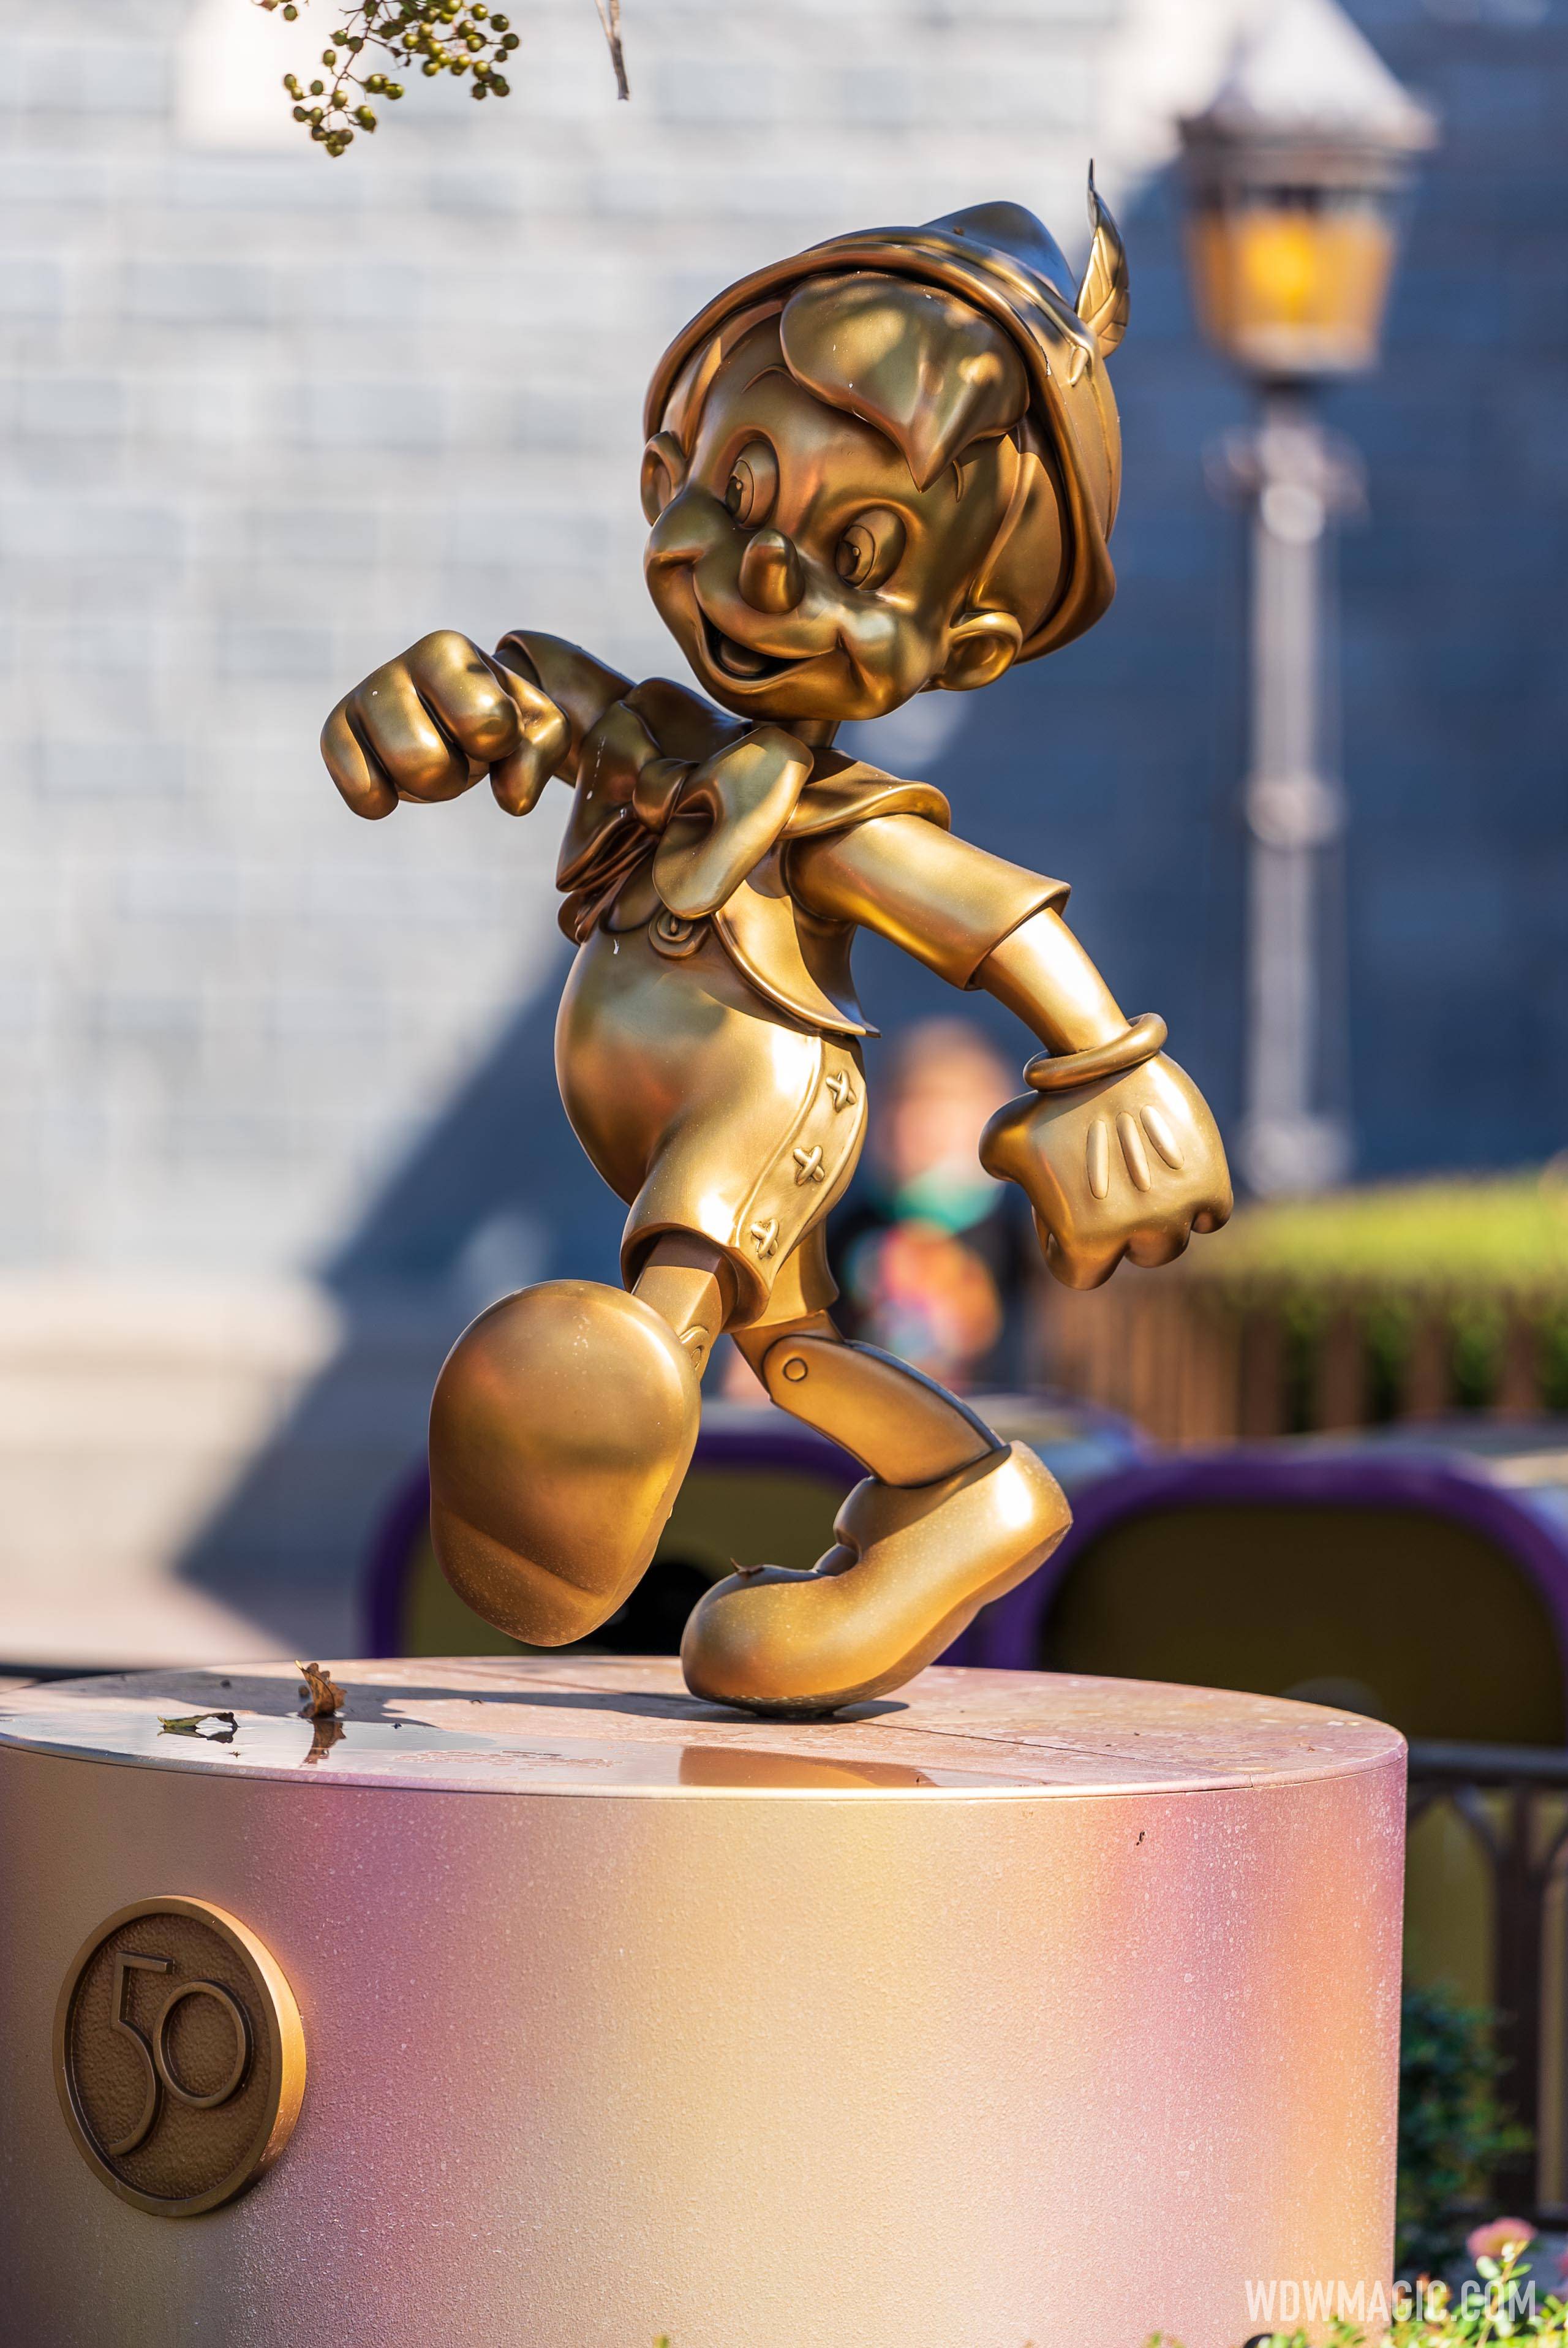 Pinocchio - Fab 50 Character Statue